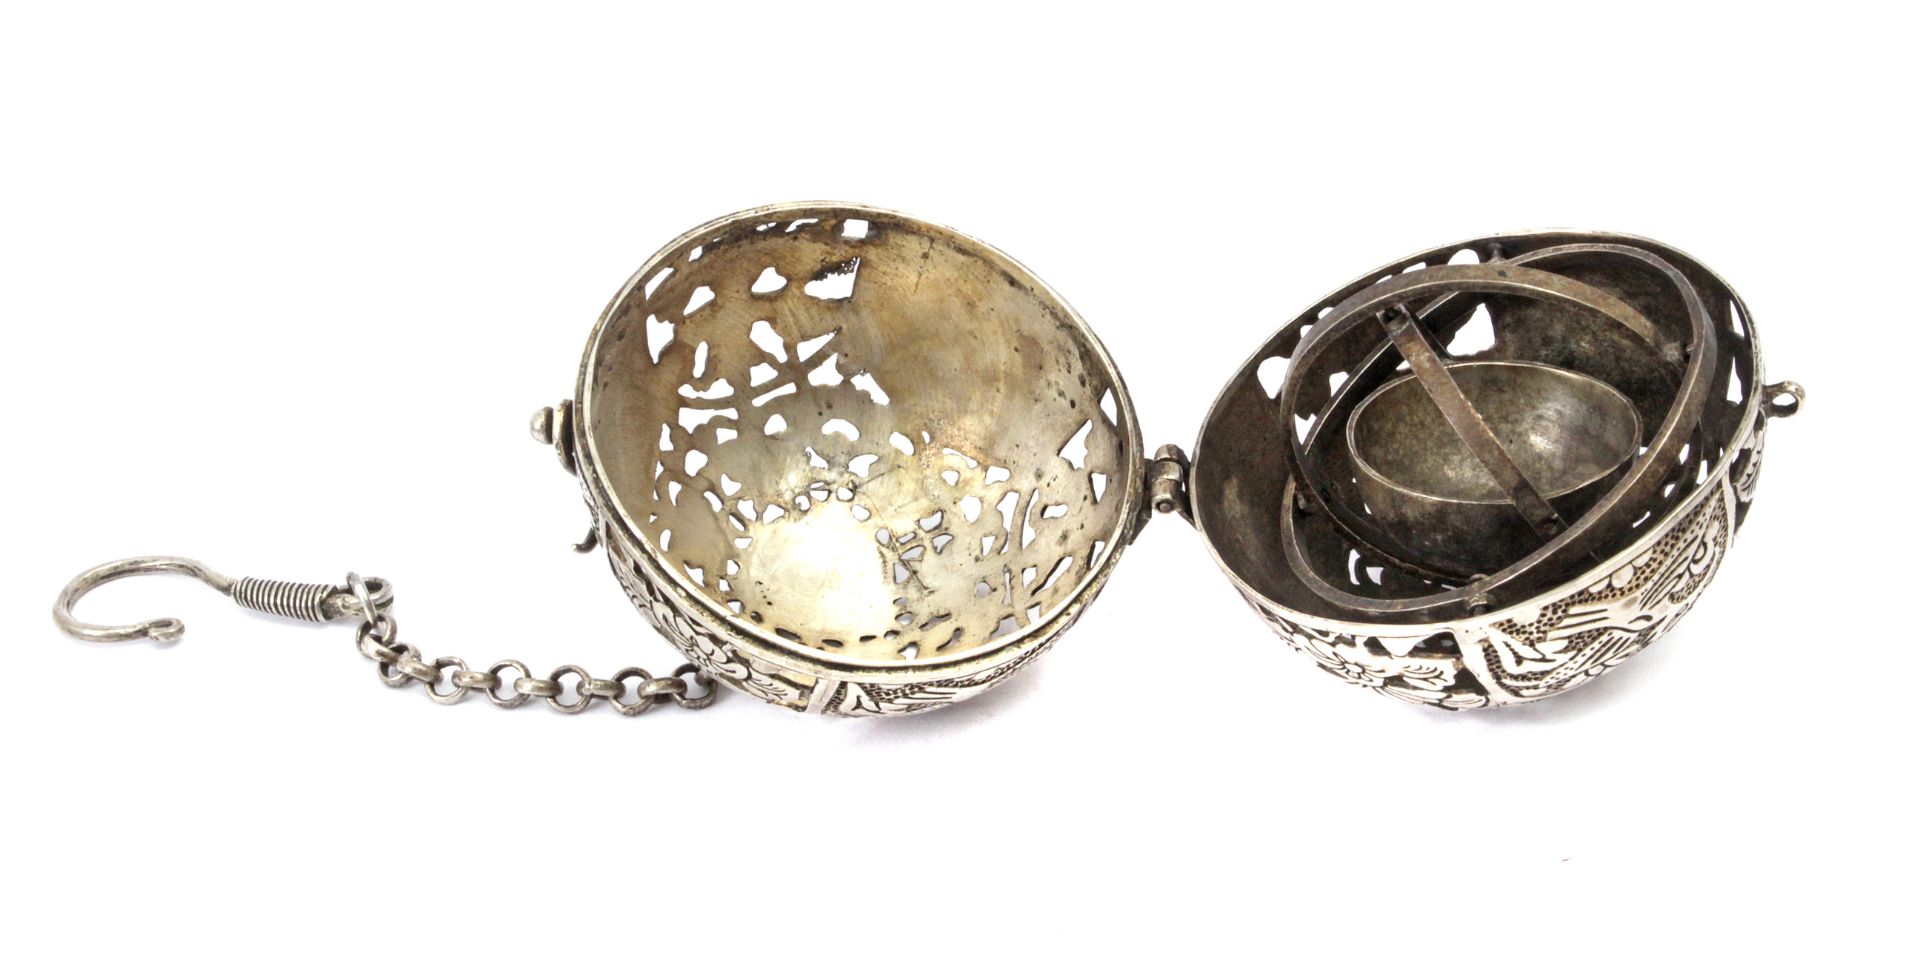 Early 20th century Chinese silver hanging censer/thurible - Image 3 of 4